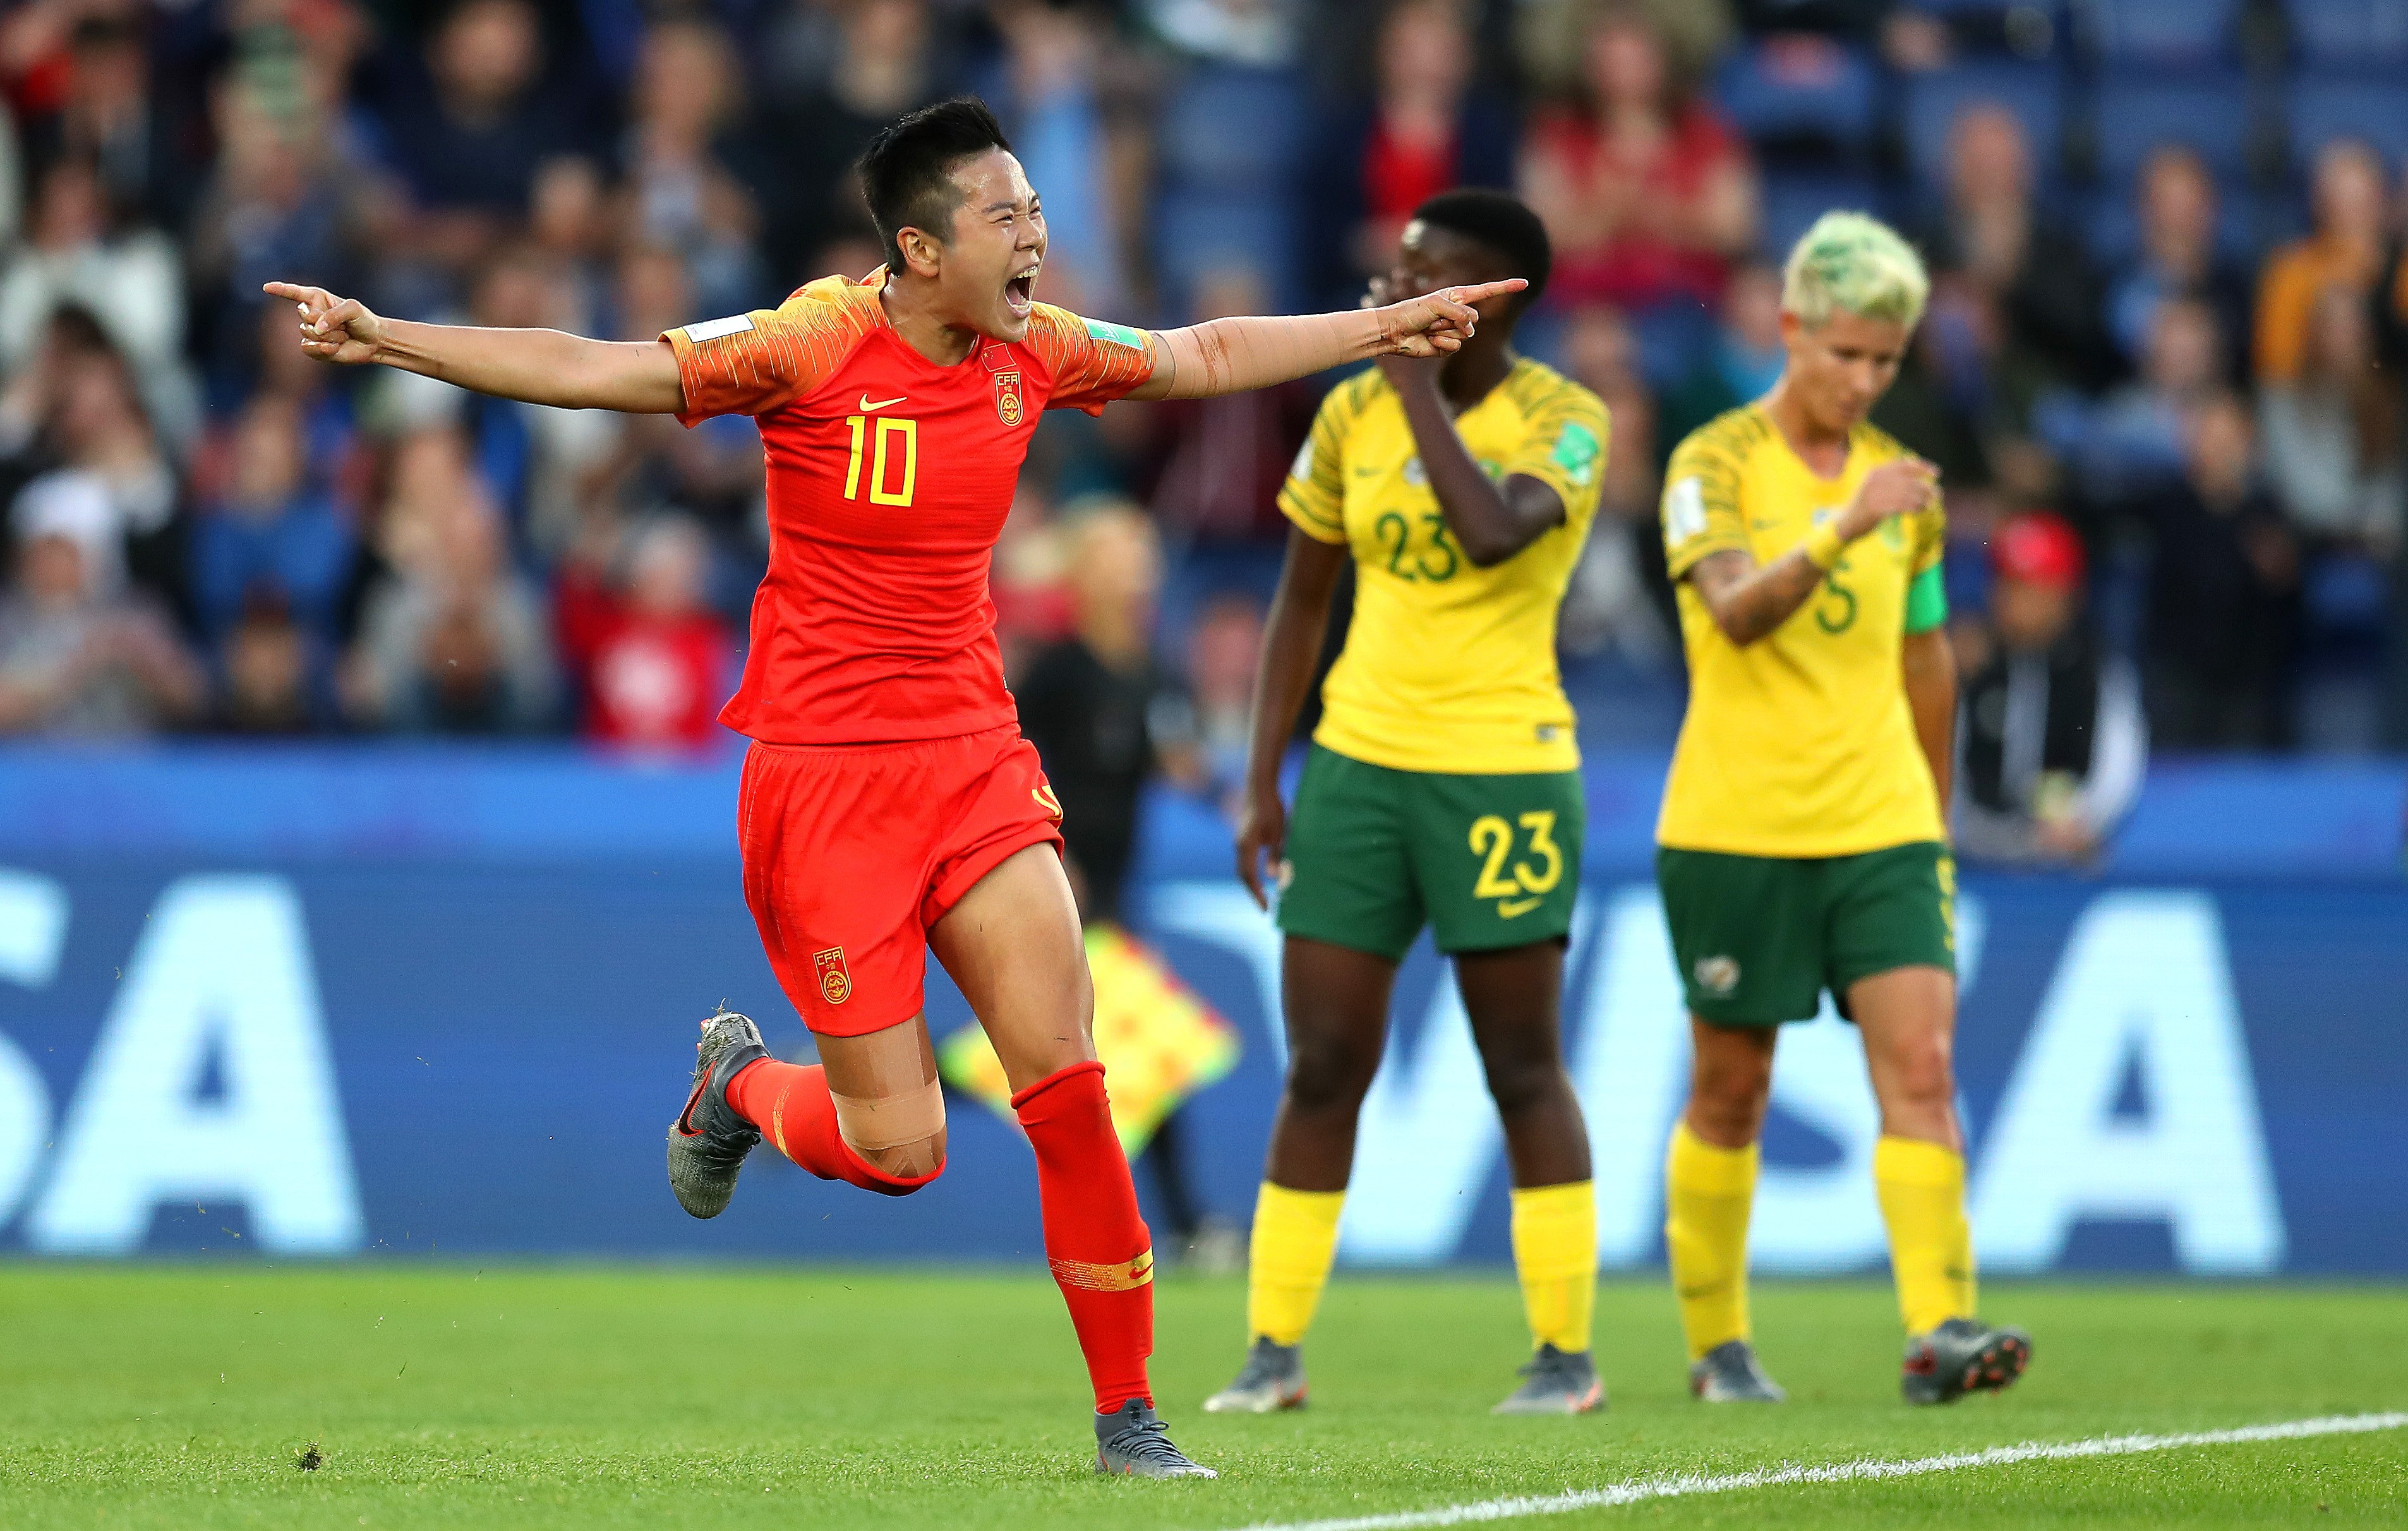 Li Ying celebrates after scoring against South Africa at the 2019 Fifa Women’s World Cup in France. Photo: Fifa via Getty Images.